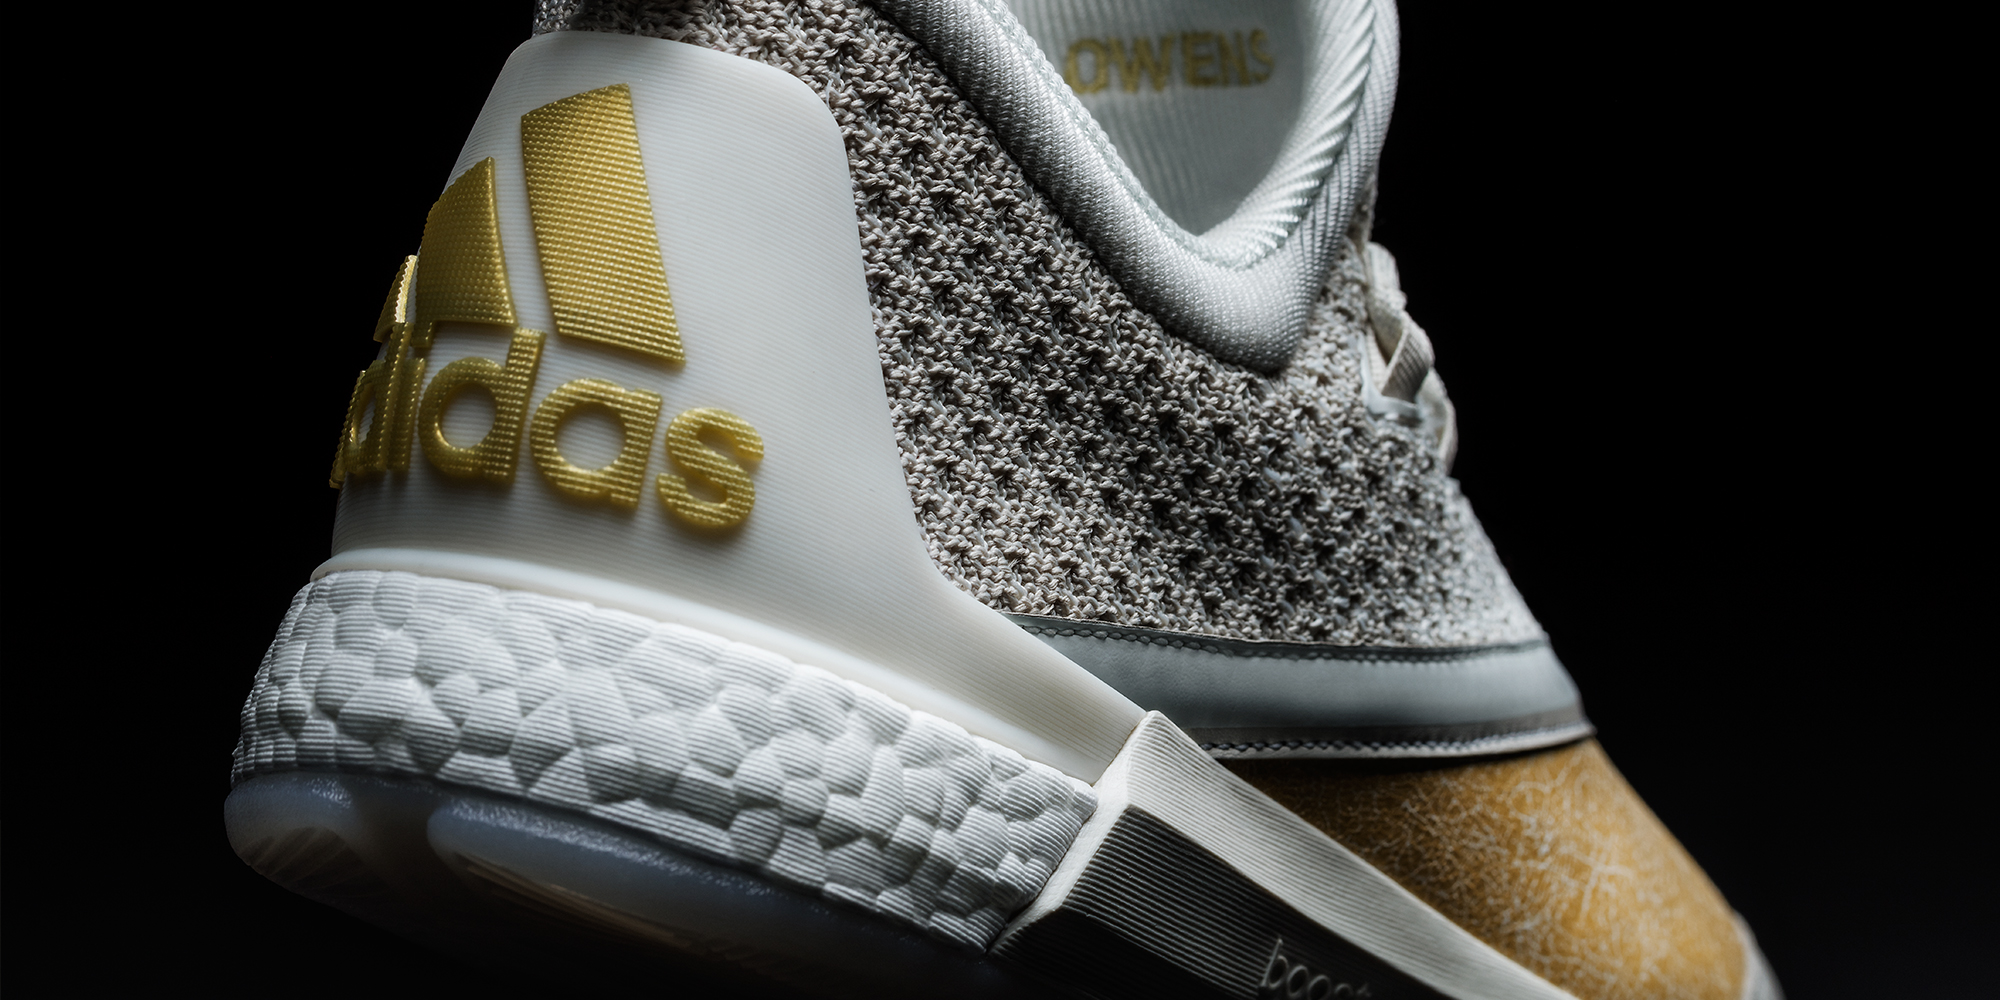 adidas Celebrates Jesse Owens with Black History Month Collection